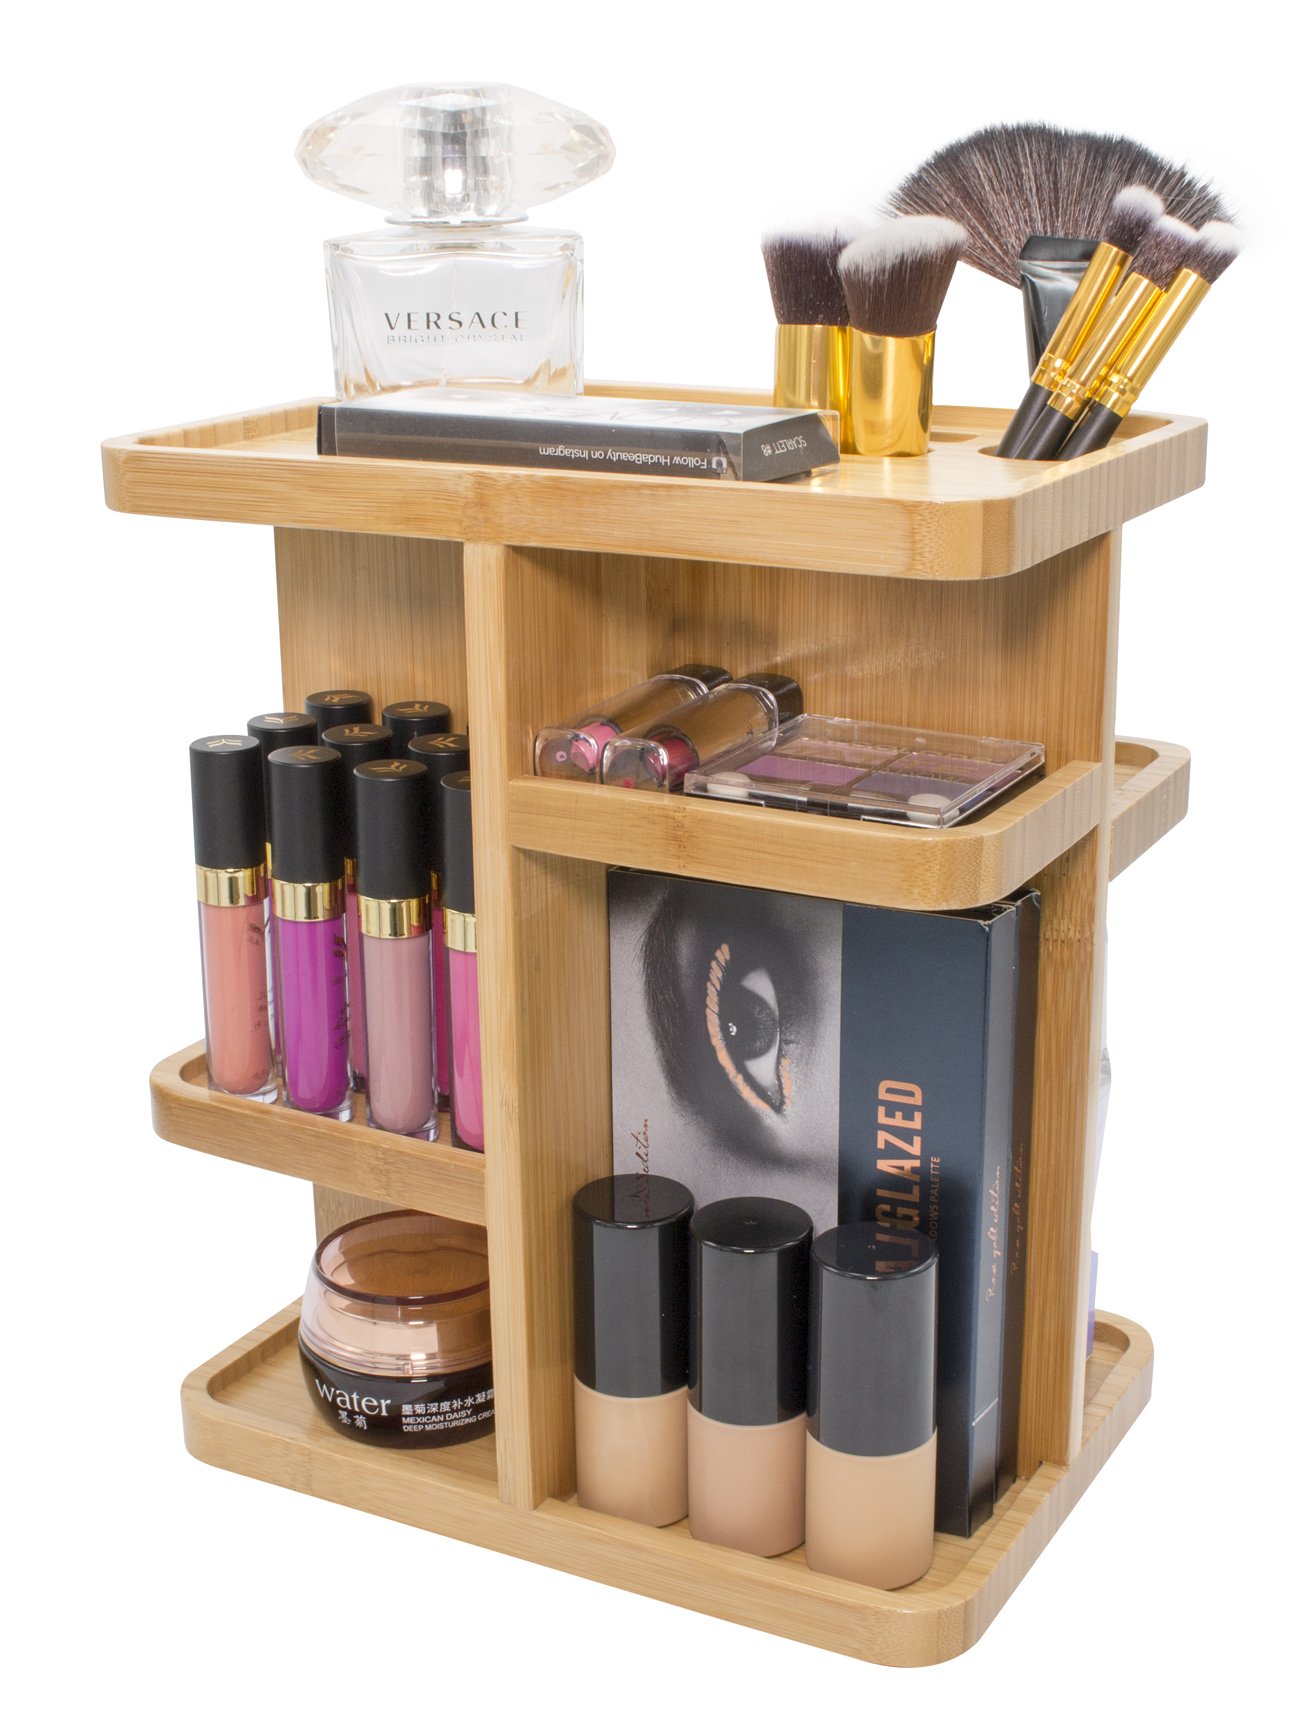 Sorbus 360° Bamboo Cosmetic Organizer, Multi-Function Storage Carousel for Makeup, Toiletries, and More — Great for Vanity, Desk, Bathroom, Bedroom...